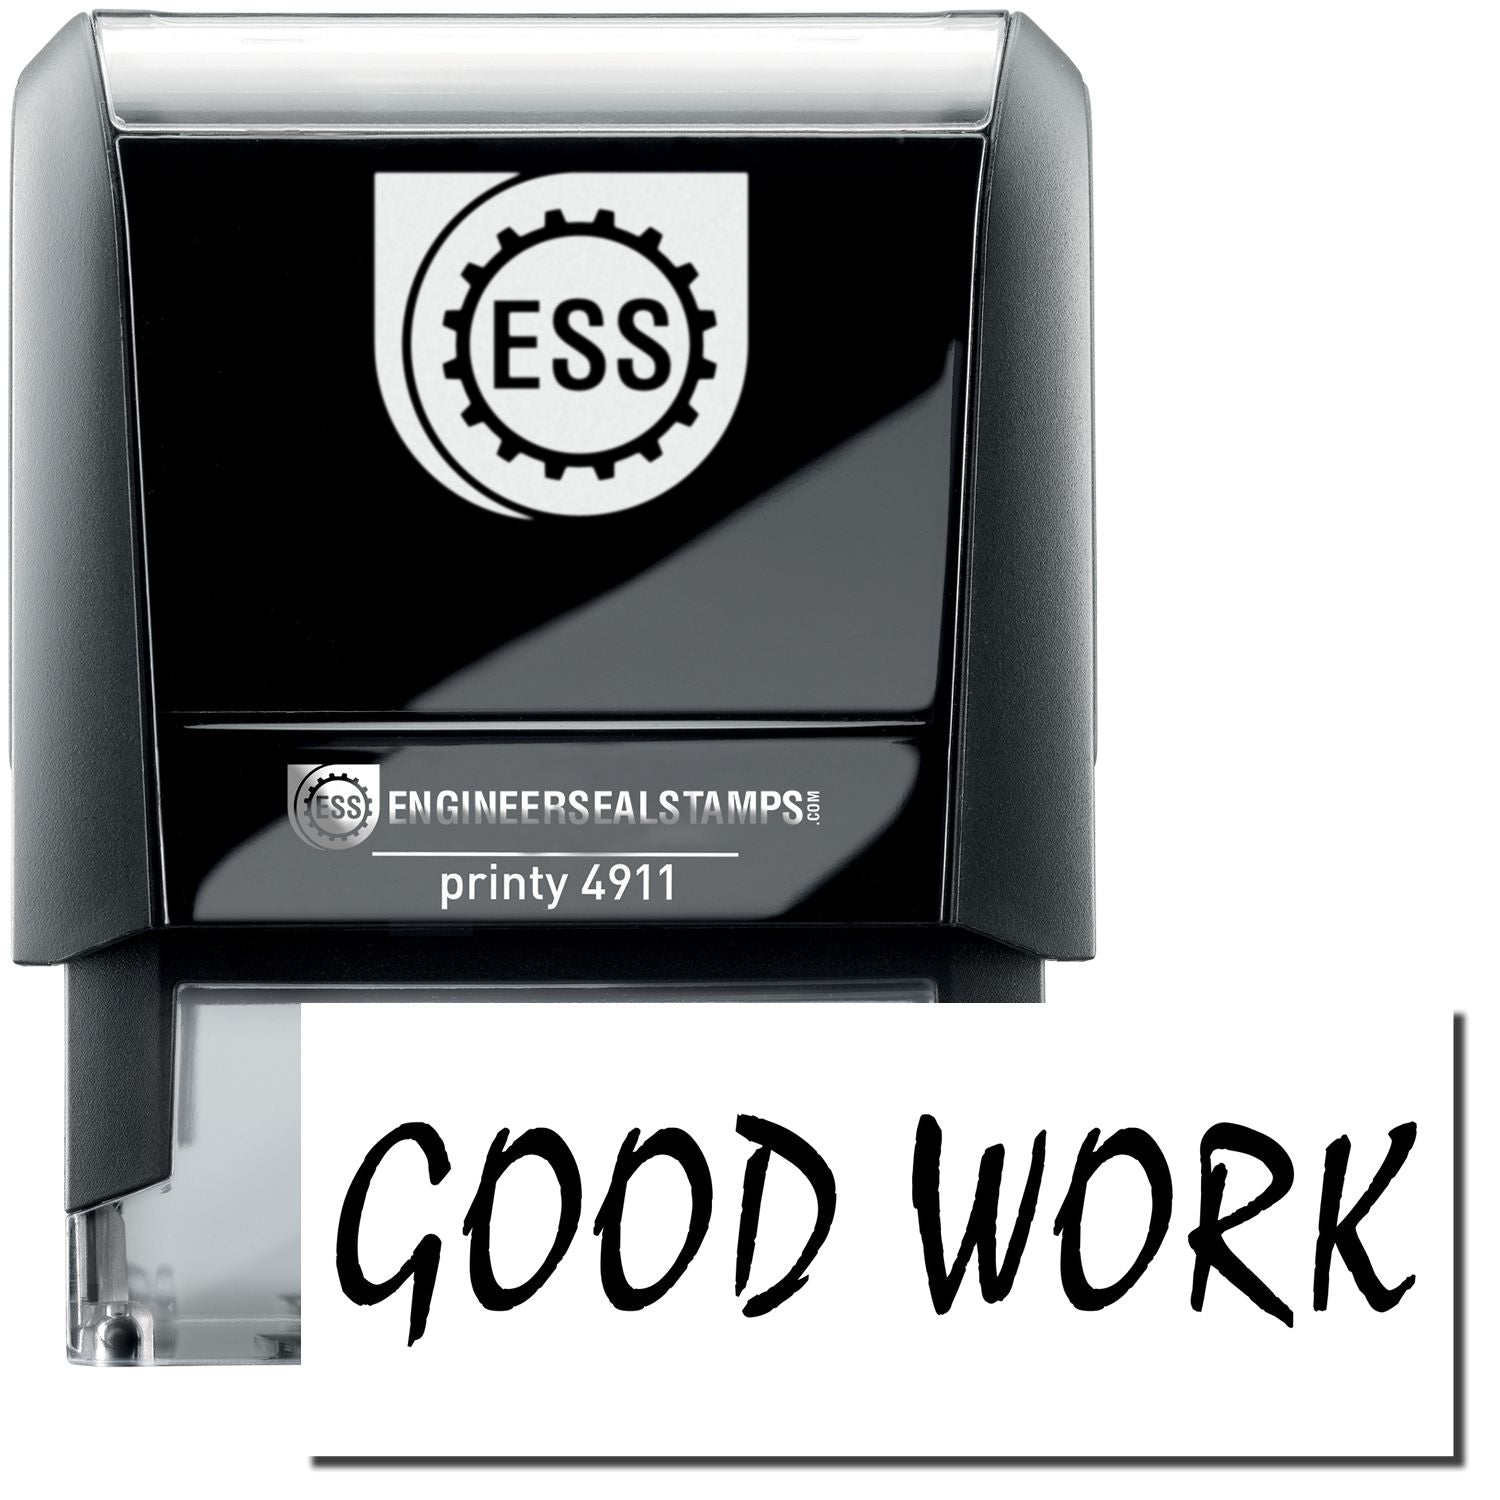 A self-inking stamp with a stamped image showing how the text "GOOD WORK" is displayed after stamping.